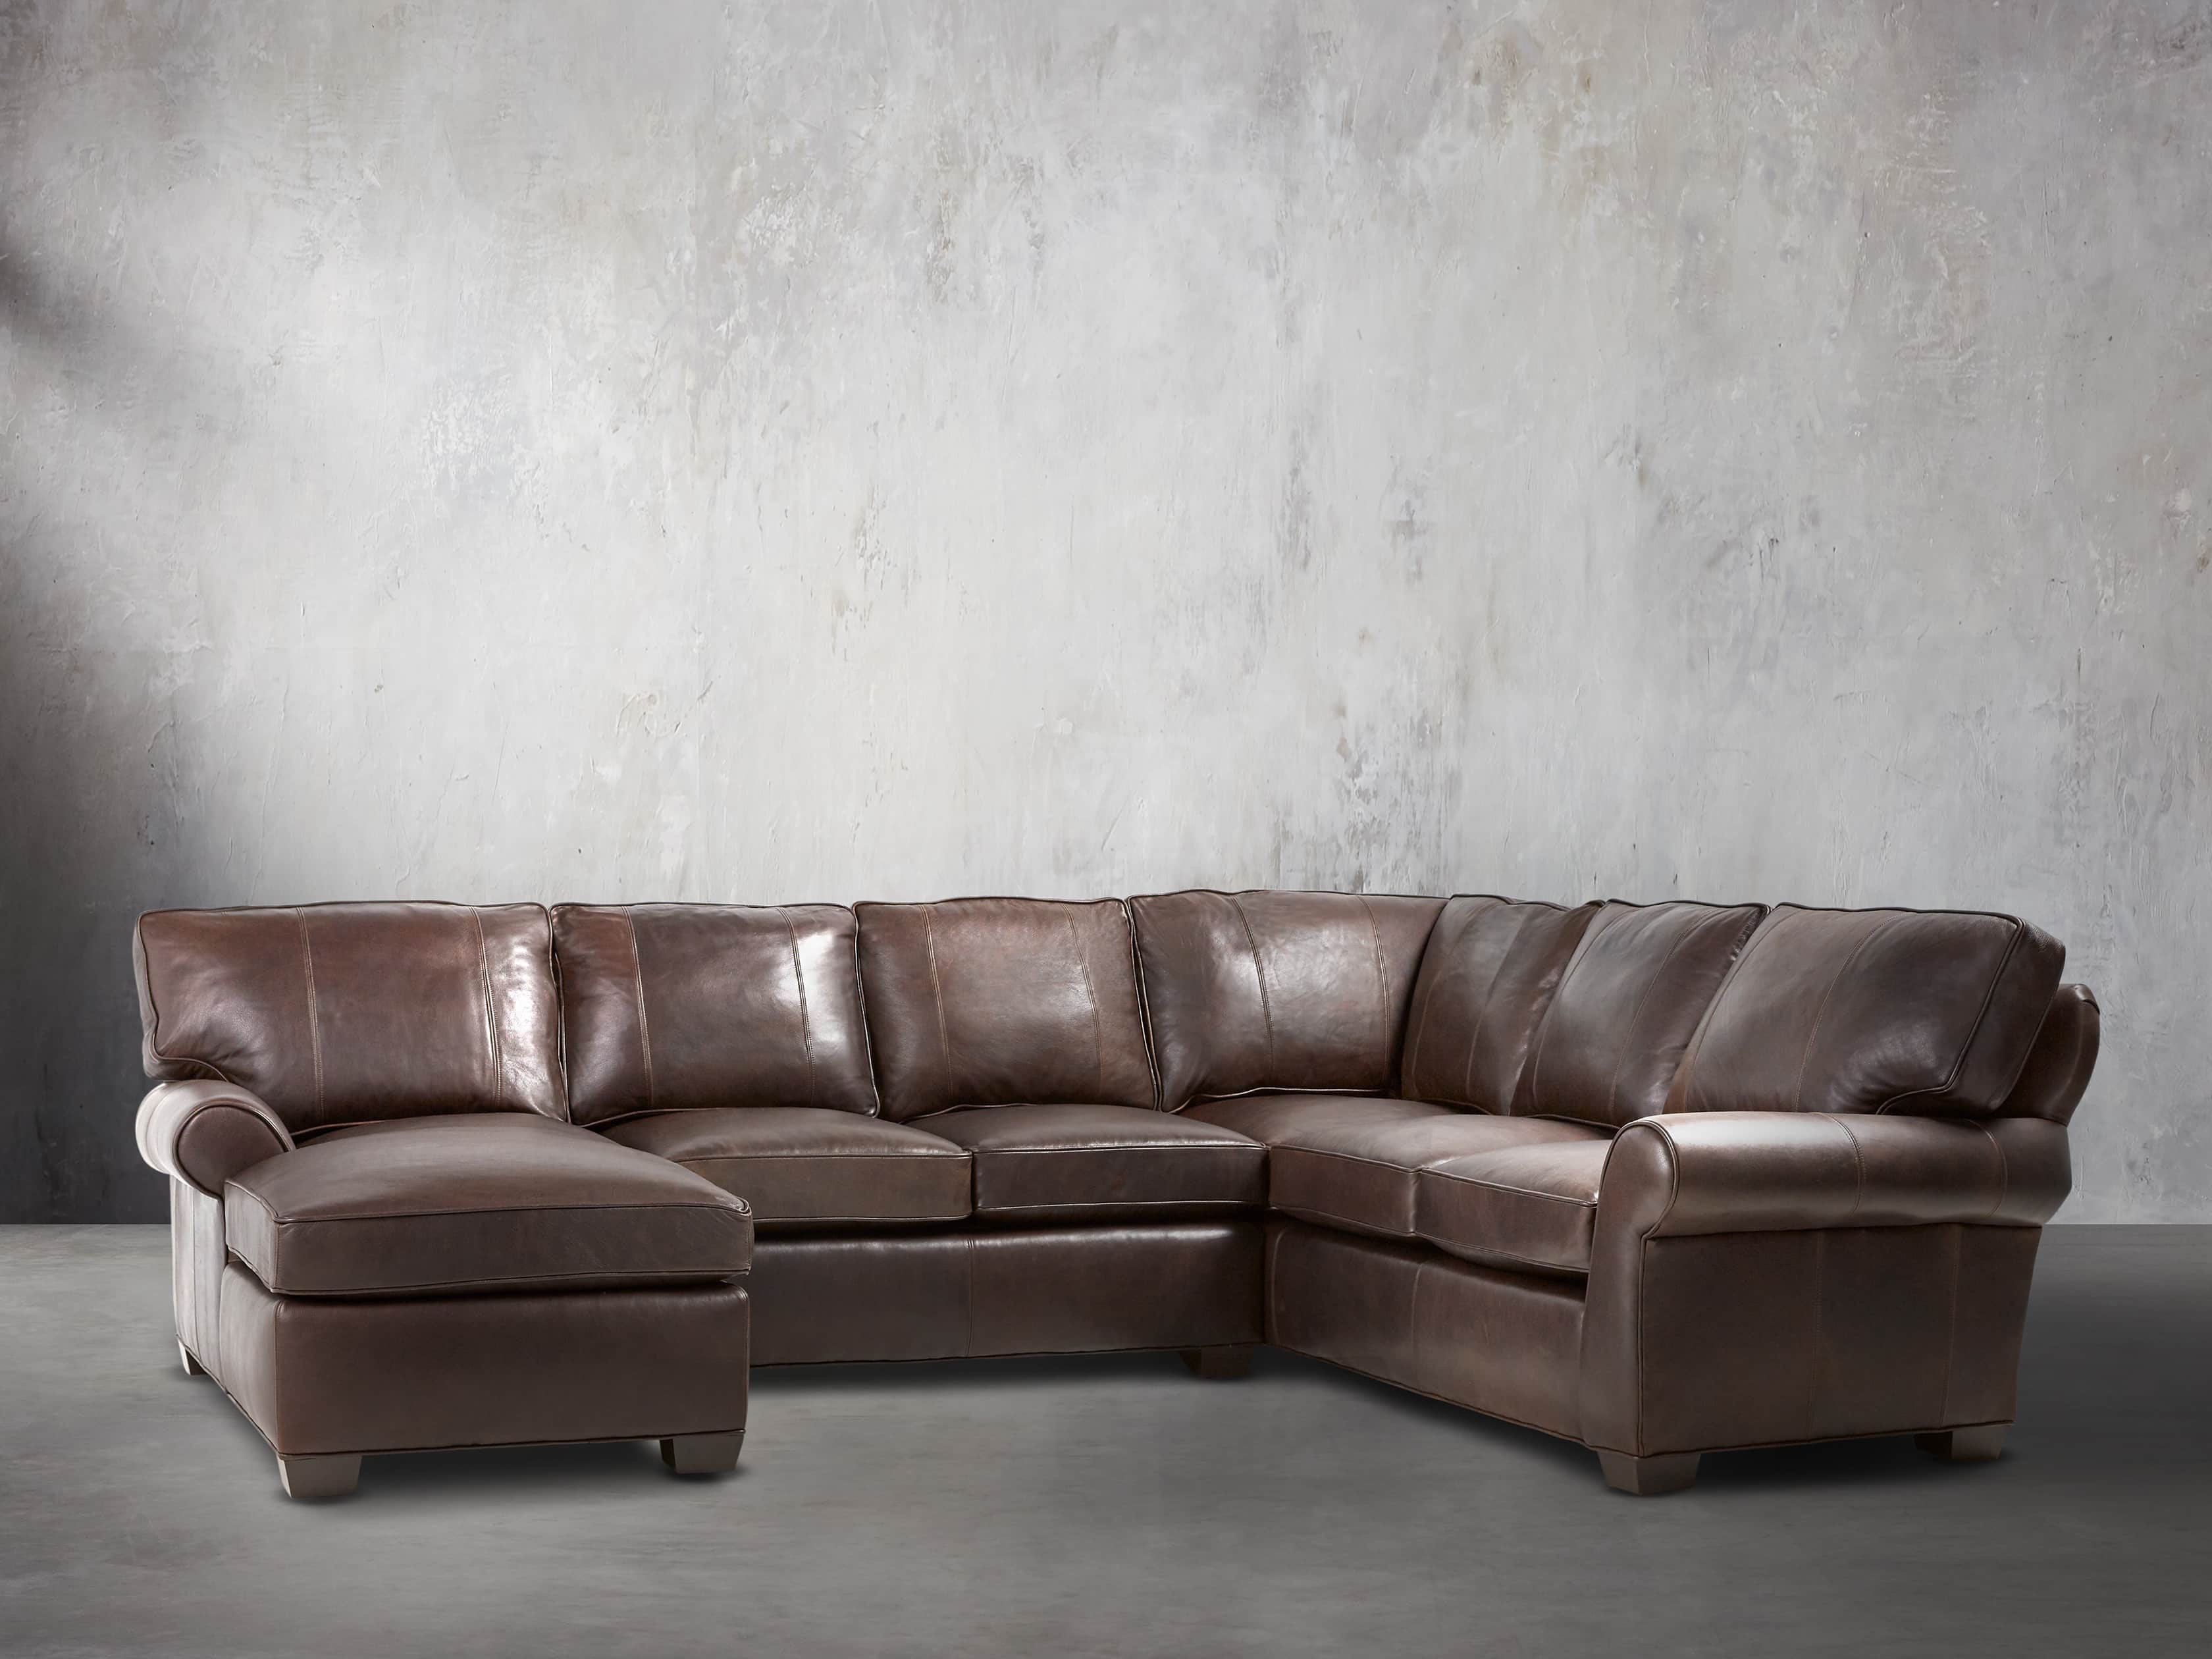 Bwood Leather Three Piece Sectional, Texas Leather Furniture And Accessories Ltd